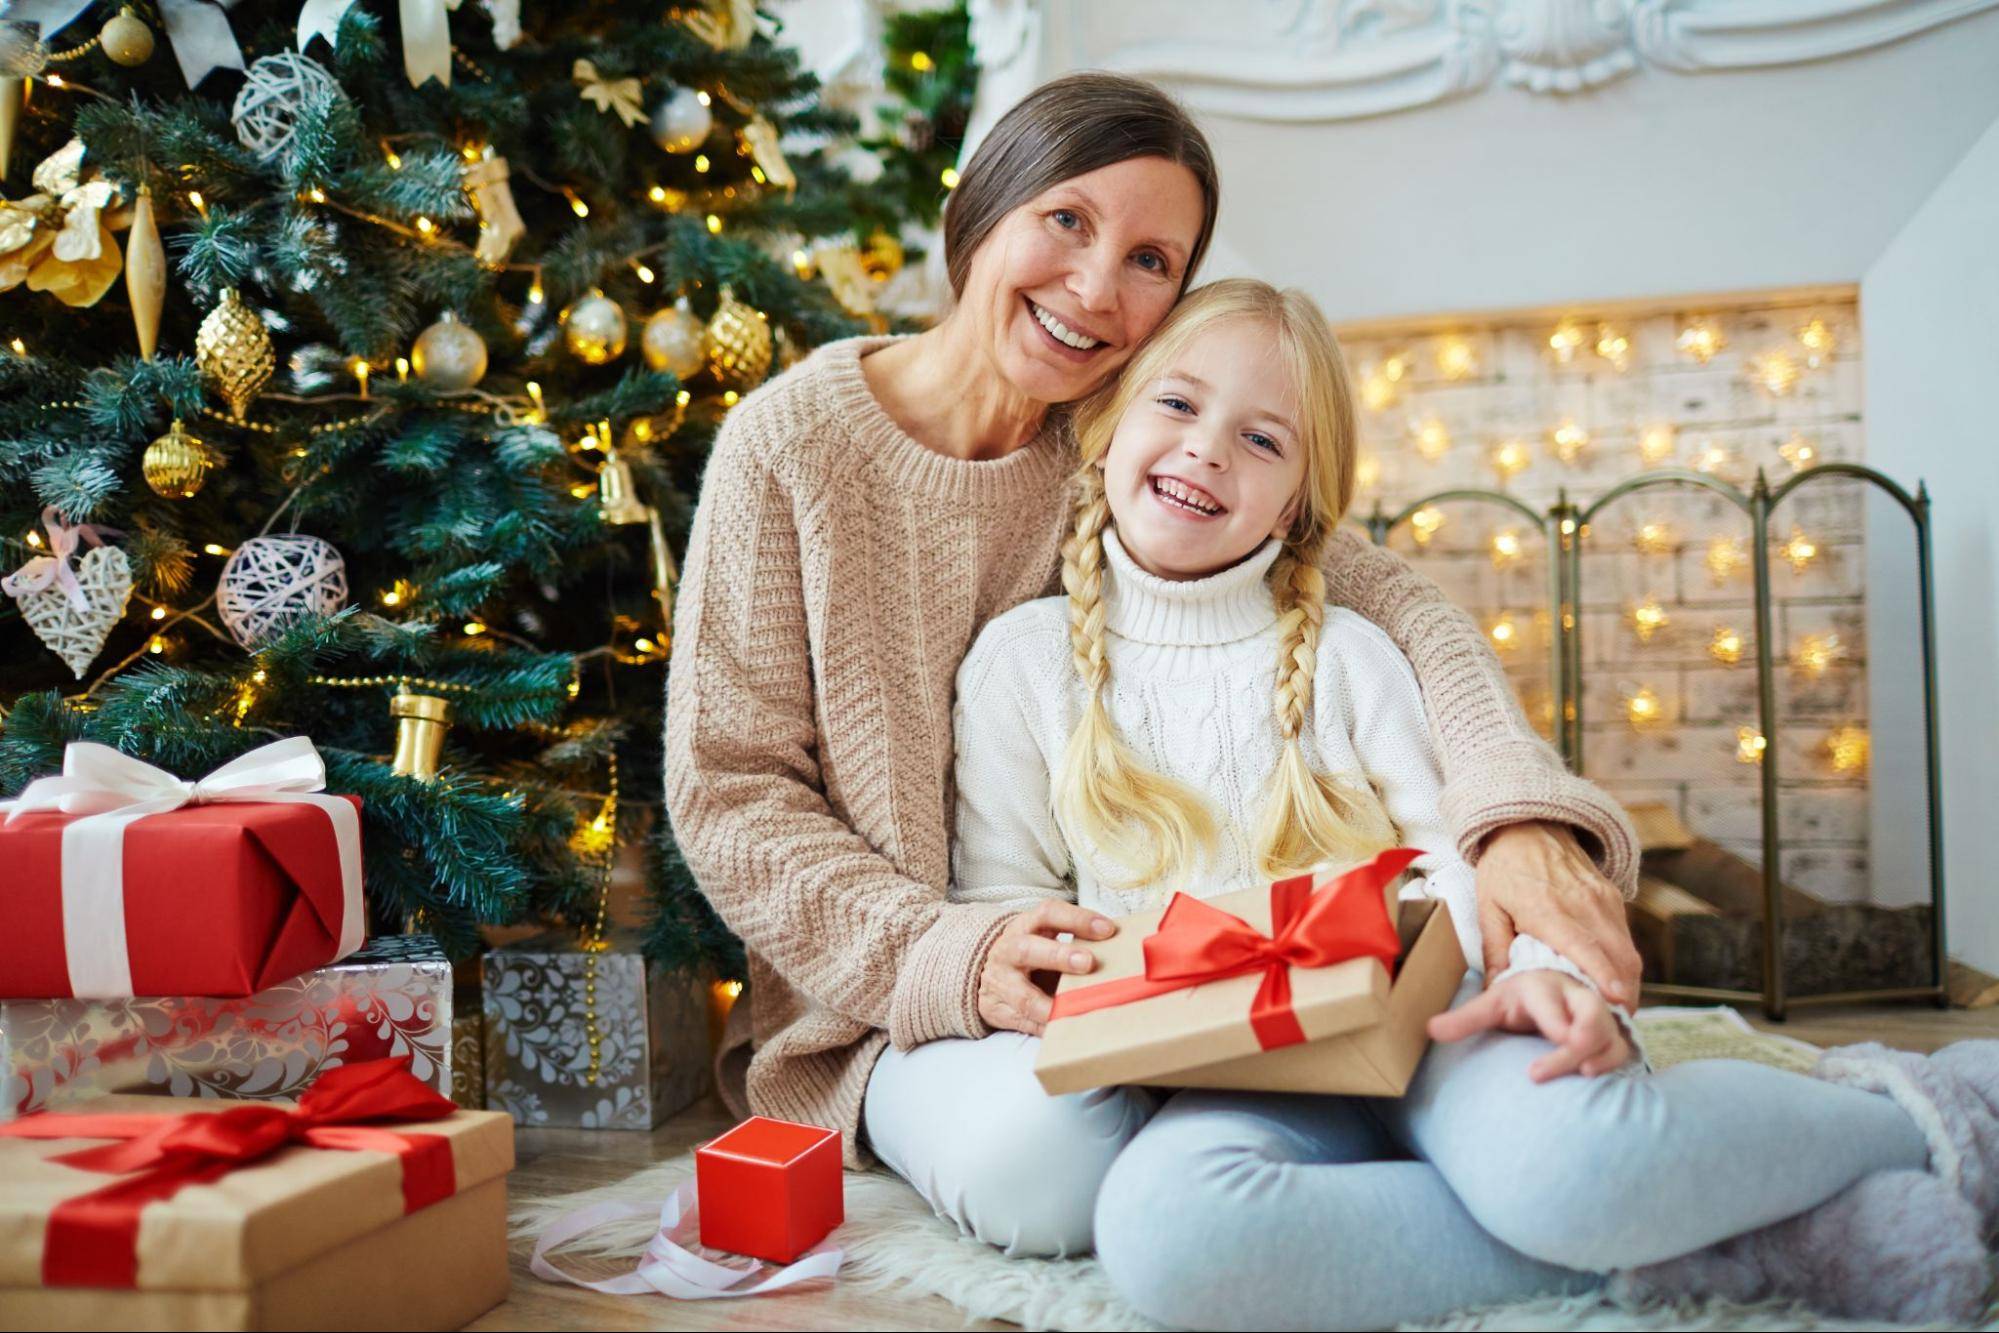 daughter holding presents on mom's lap in front of Christmas tree